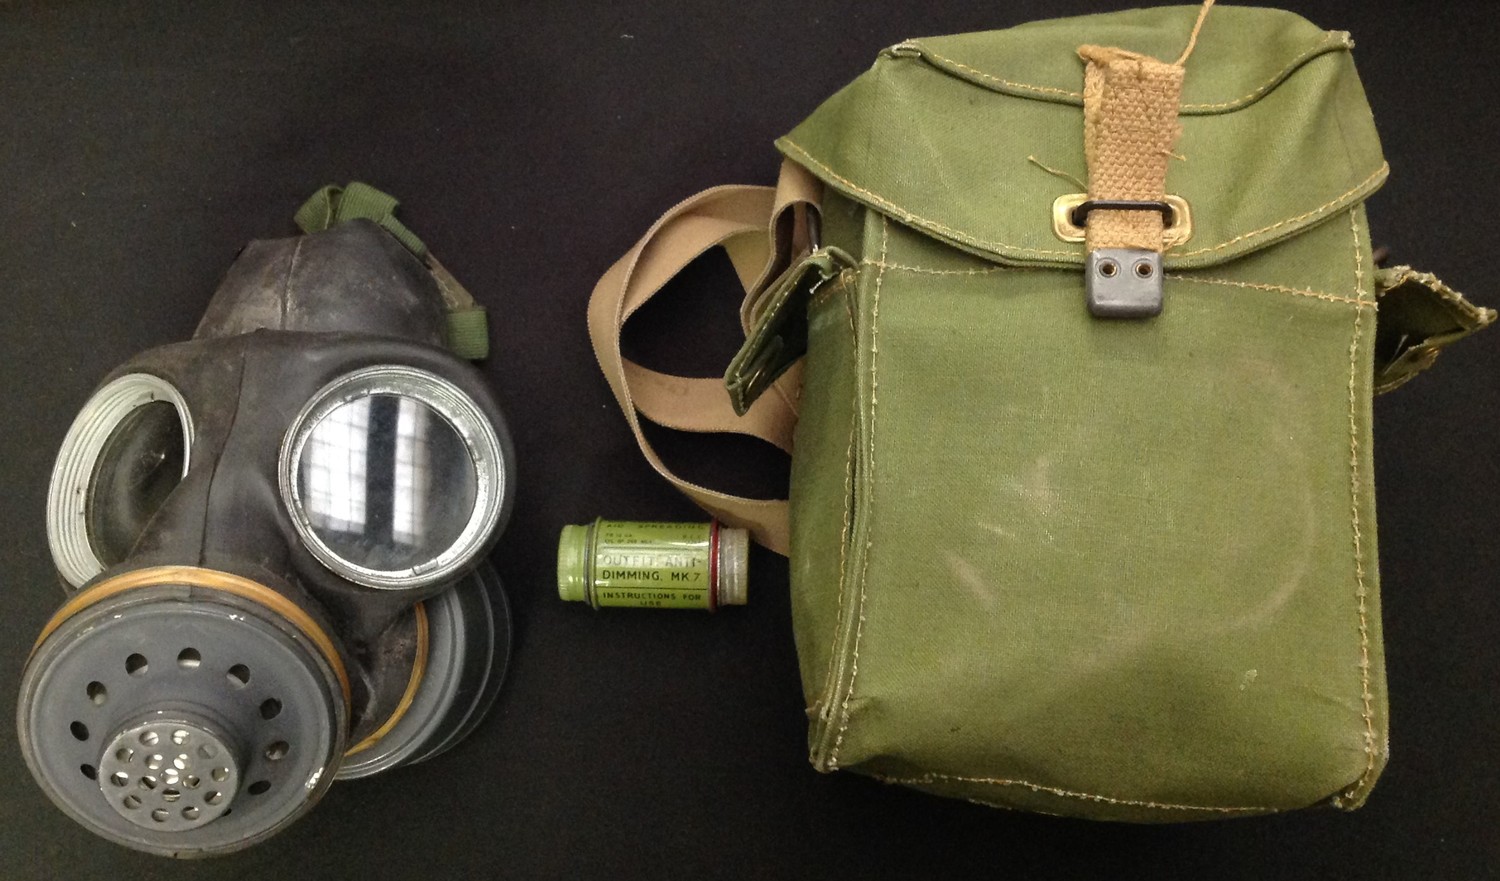 WW2 pattern British Lightweight Respirator, mask dated 2-1952, straps dated 3/1965 and complete with